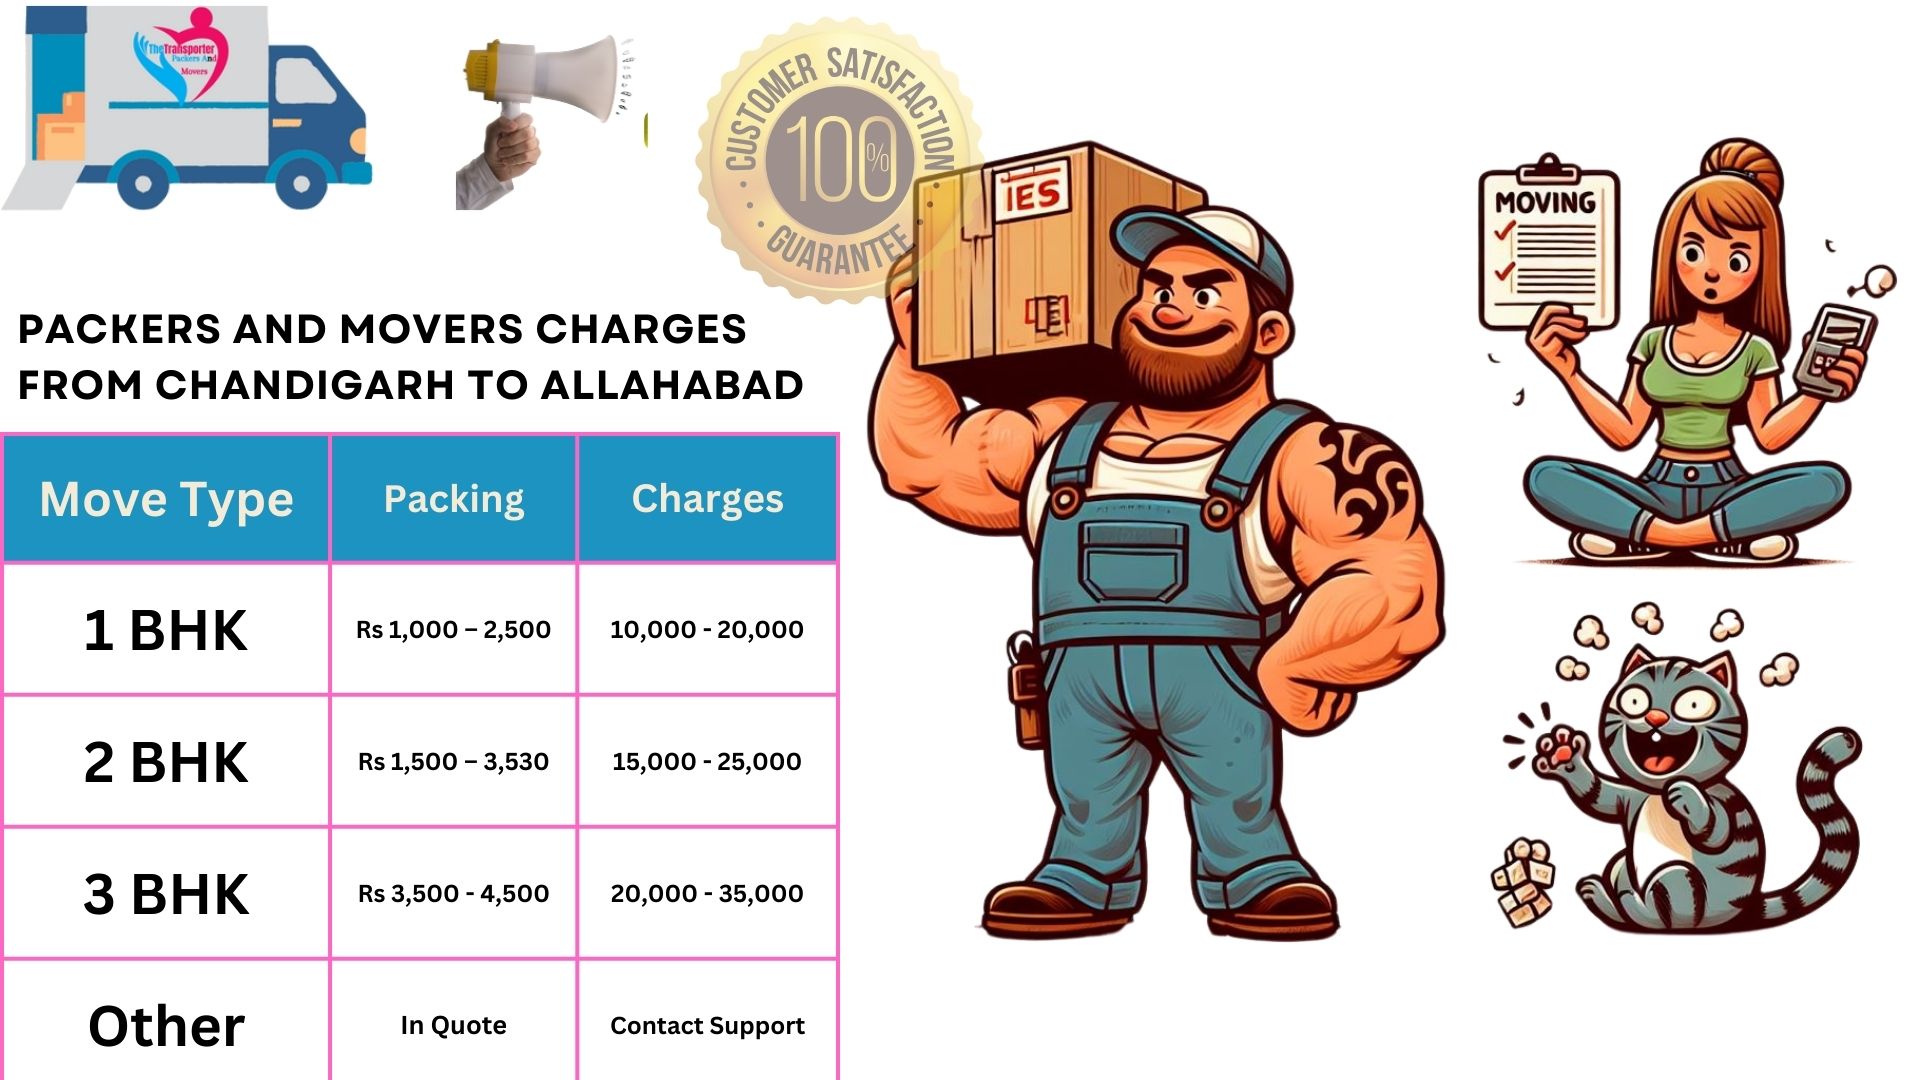 Movers and Packers cost list From Chandigarh to Allahabad